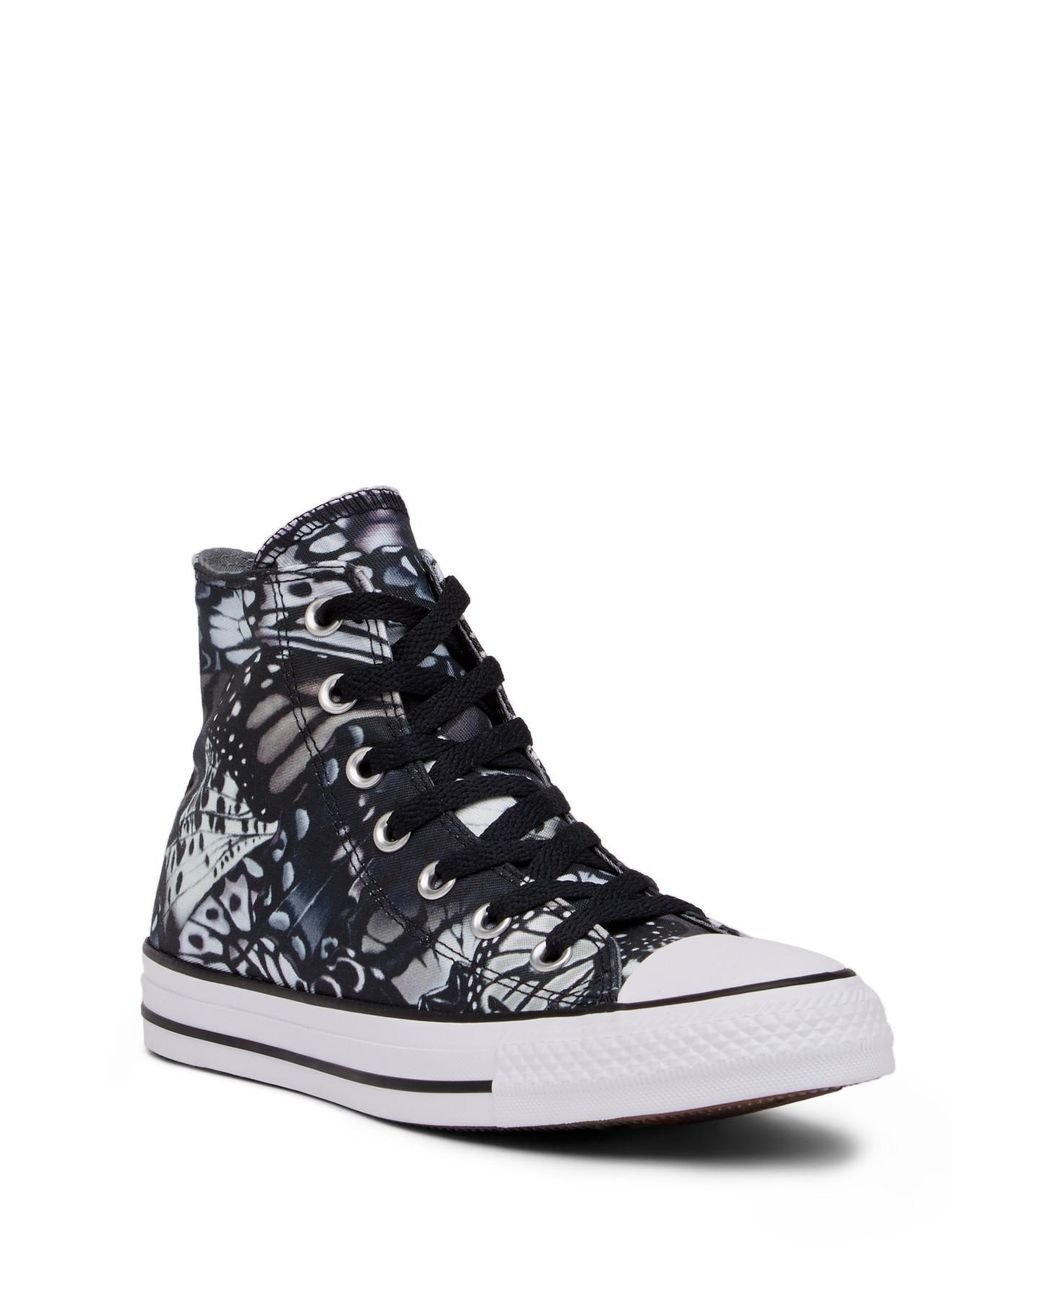 Converse Chuck Taylor All Star High Top Butterfly Graphic Sneaker in Black  | Lyst